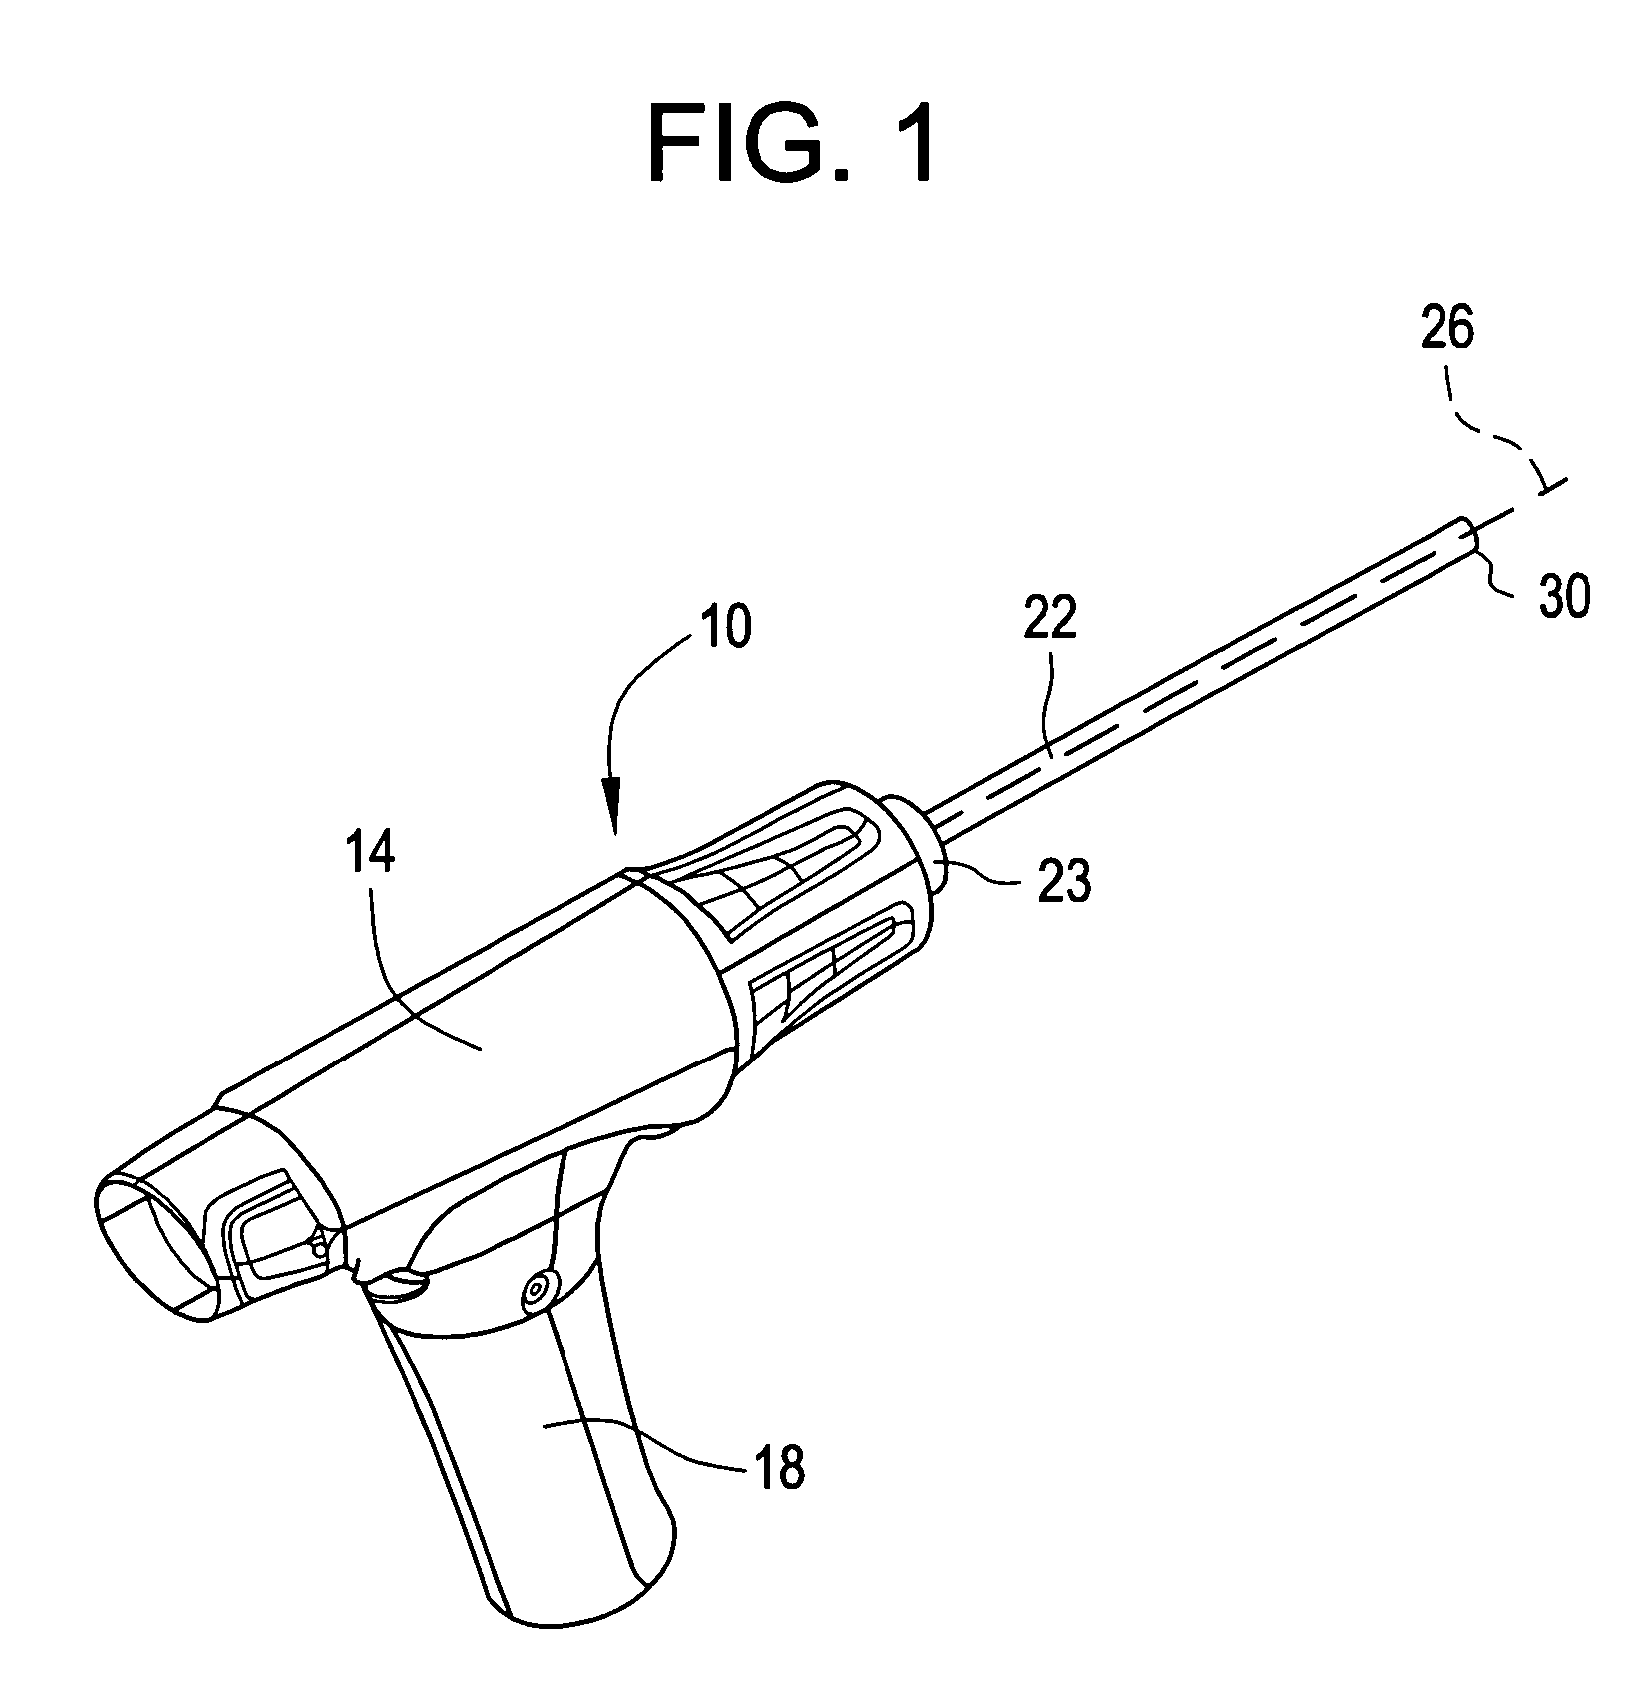 Universal attachment mechanism for attaching a tracking device to an instrument